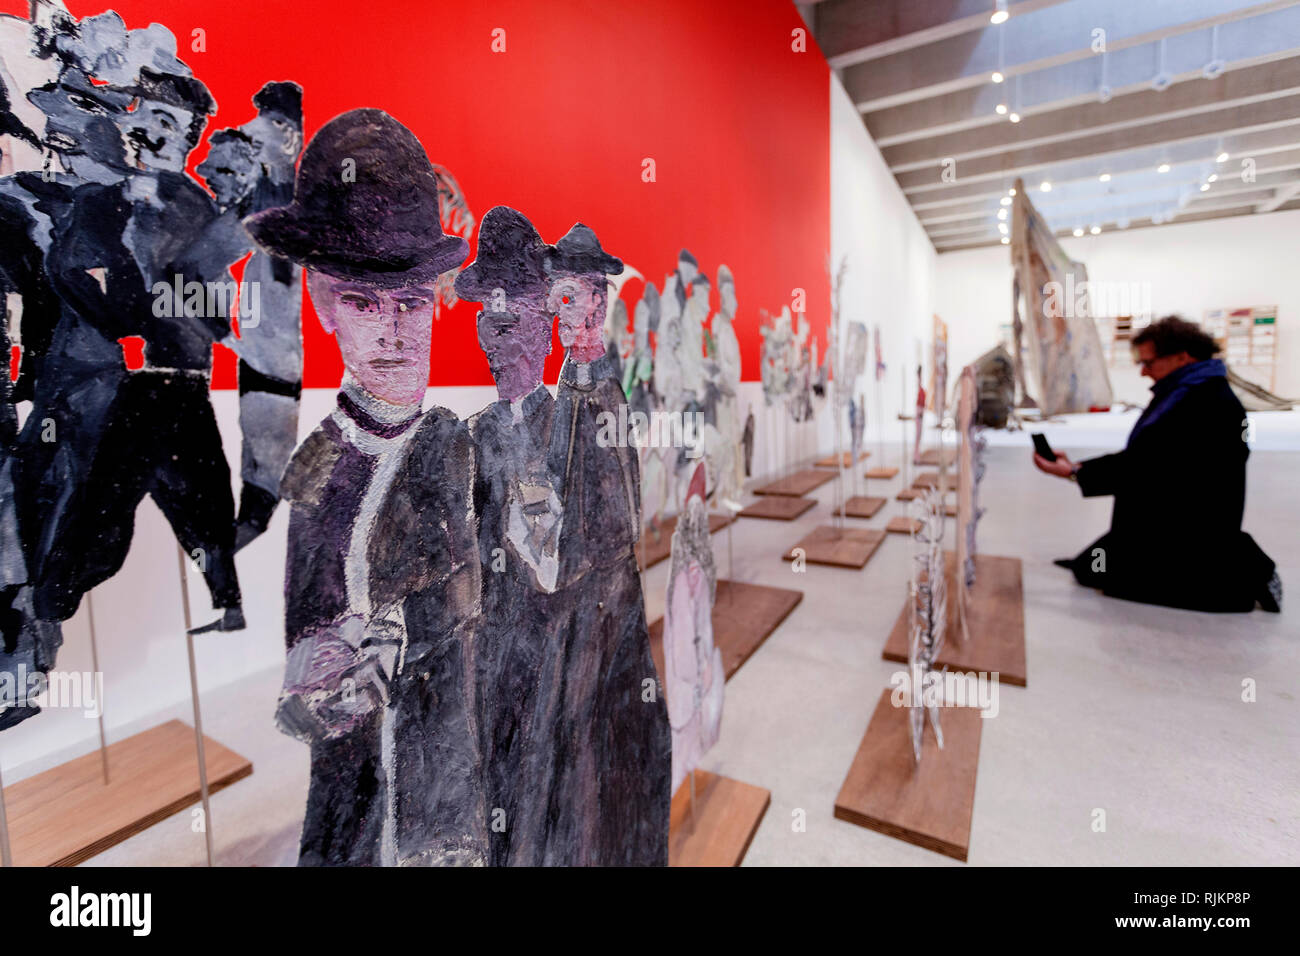 St Ives, Cornwall, UK. 7th February 2019.  Tate St Ives gallery opening of  art work by Anna Boghiguian. Credit: Mike Newman/Alamy Live News. Stock Photo